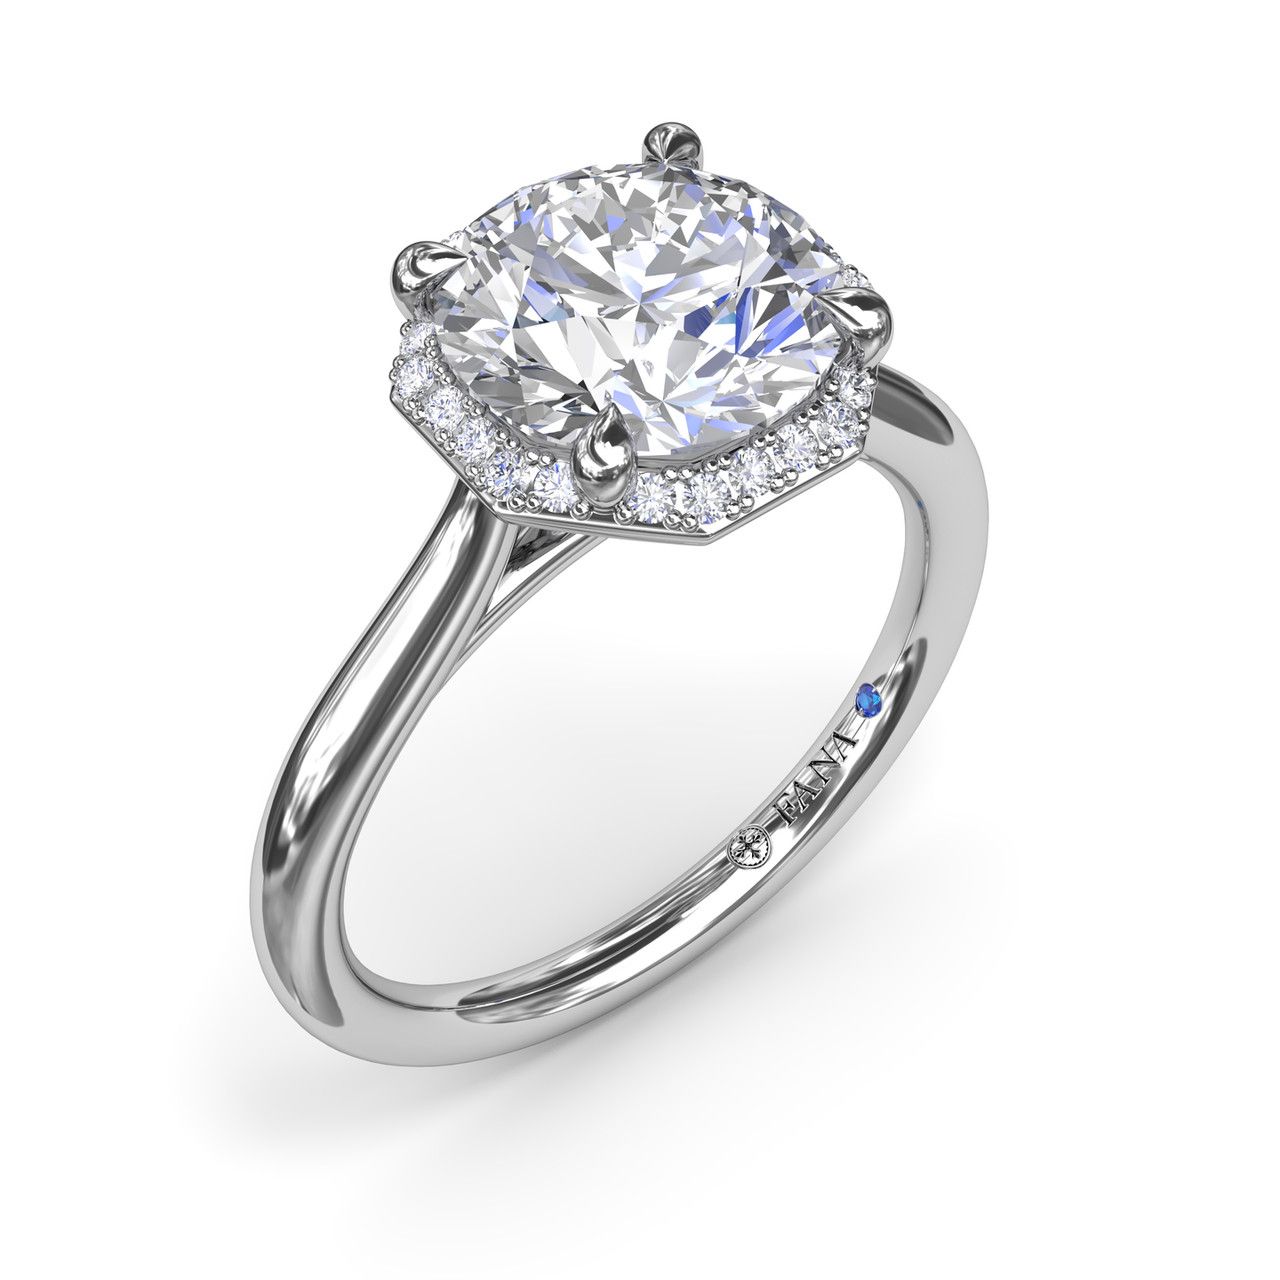 14K WHITE GOLD HALO SEMI-MOUNT RING SIZE 6.5 WITH 26=0.14TW ROUND G-H VS2-SI1 DIAMONDS AND ONE ROUND BLUE SAPPHIRE    (3.89 GRAMS)